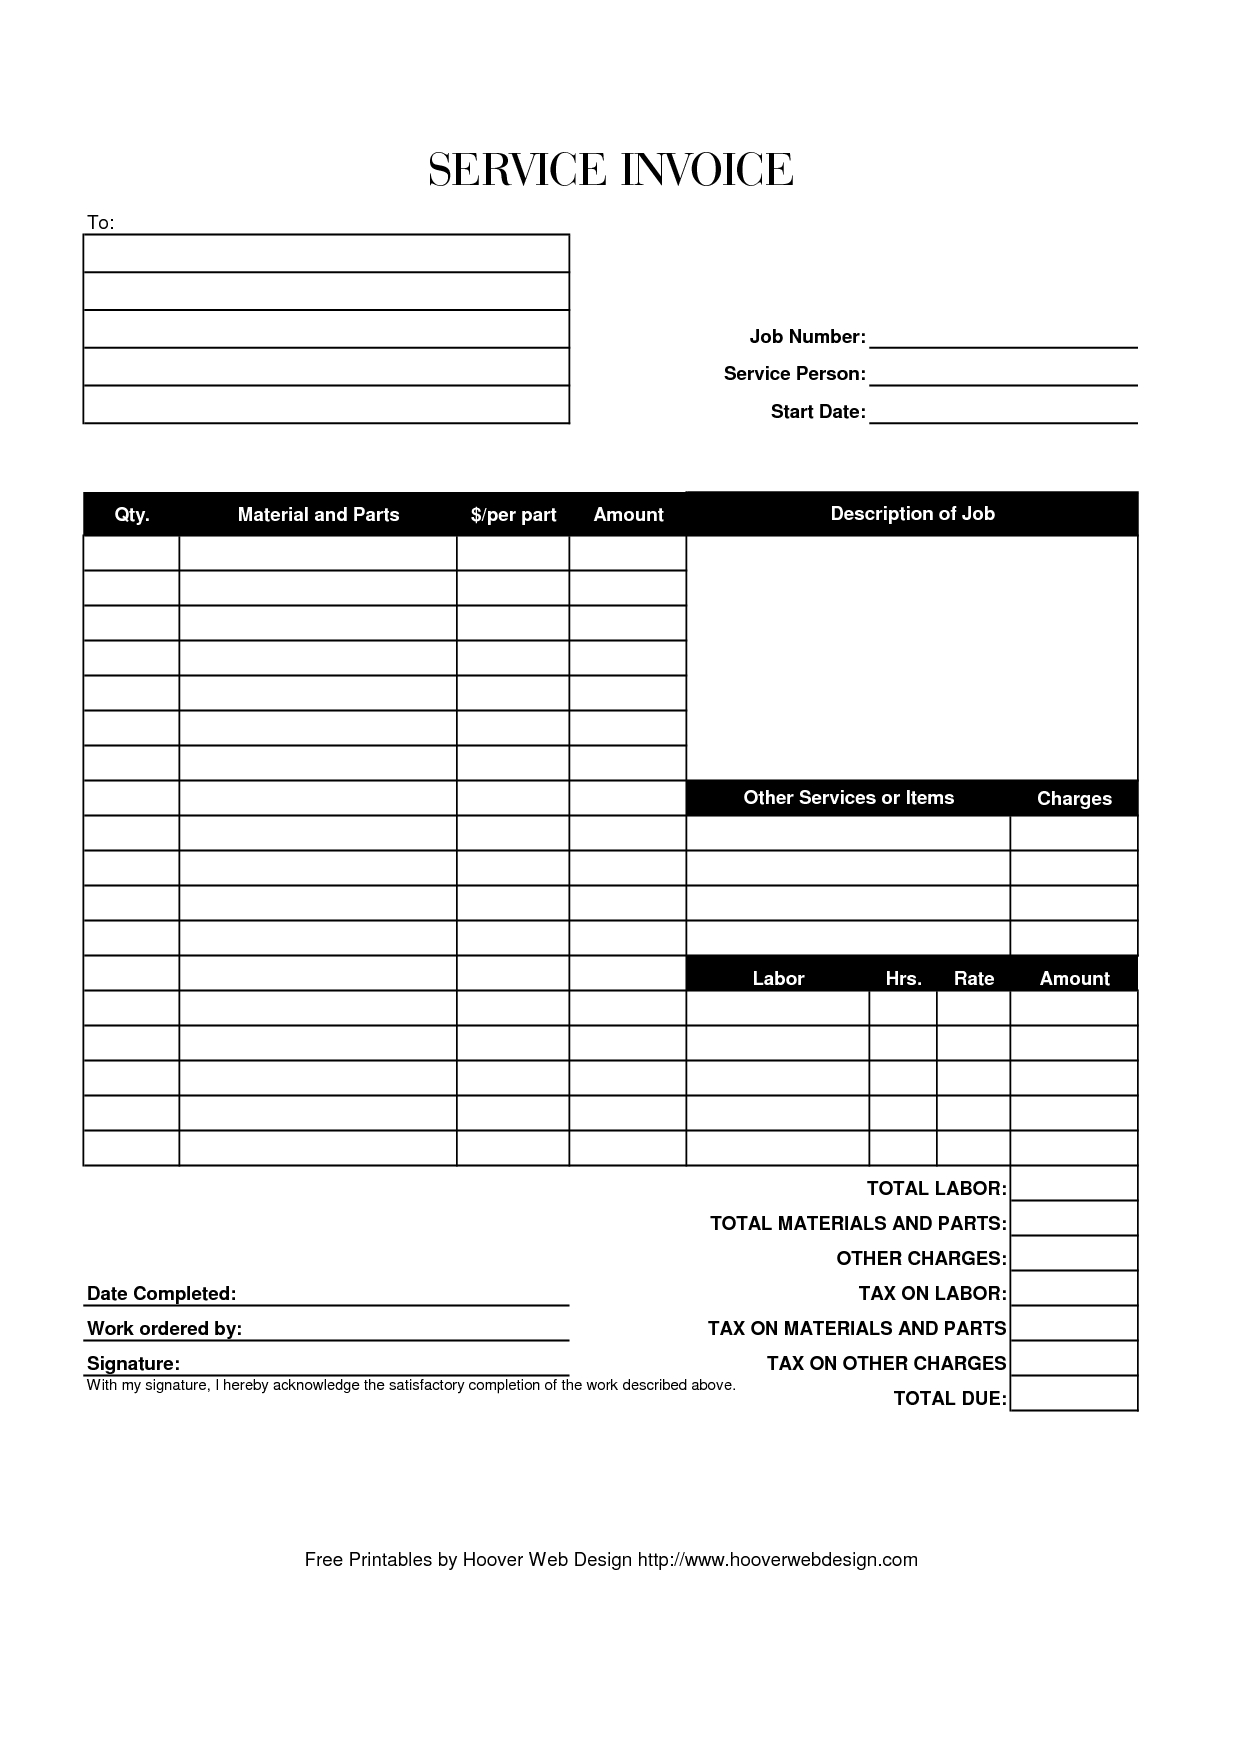 Hoover Receipts | Free Printable Service Invoice Template - Pdf - Free Invoices Online Printable